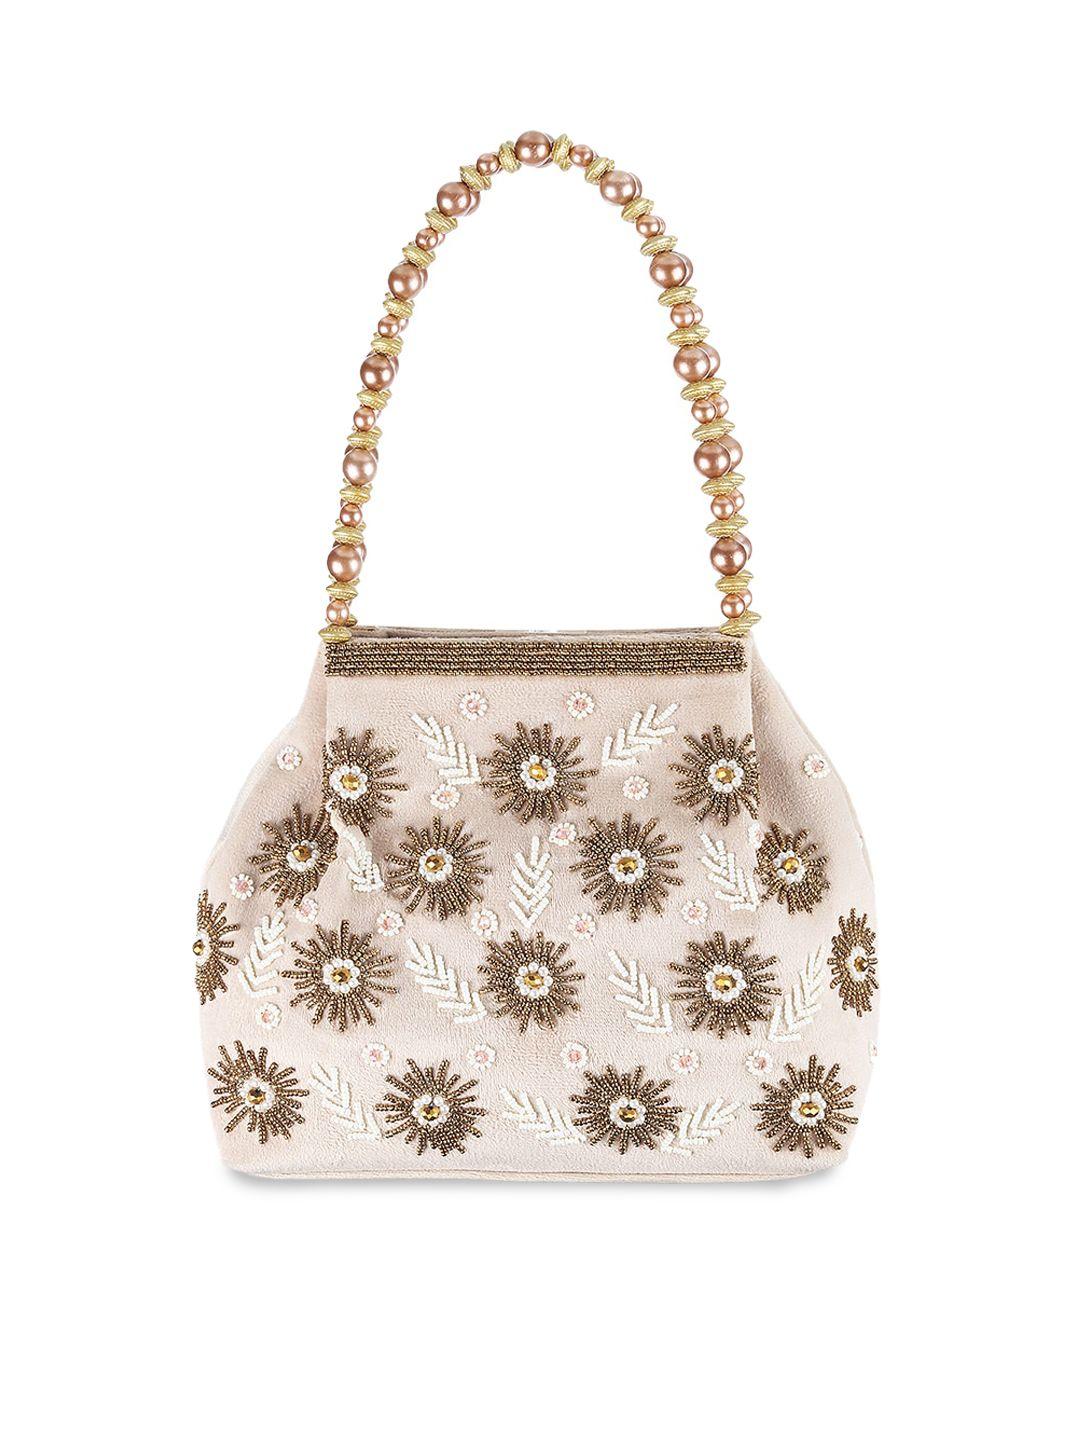 metro floral embroidered structured handheld bag